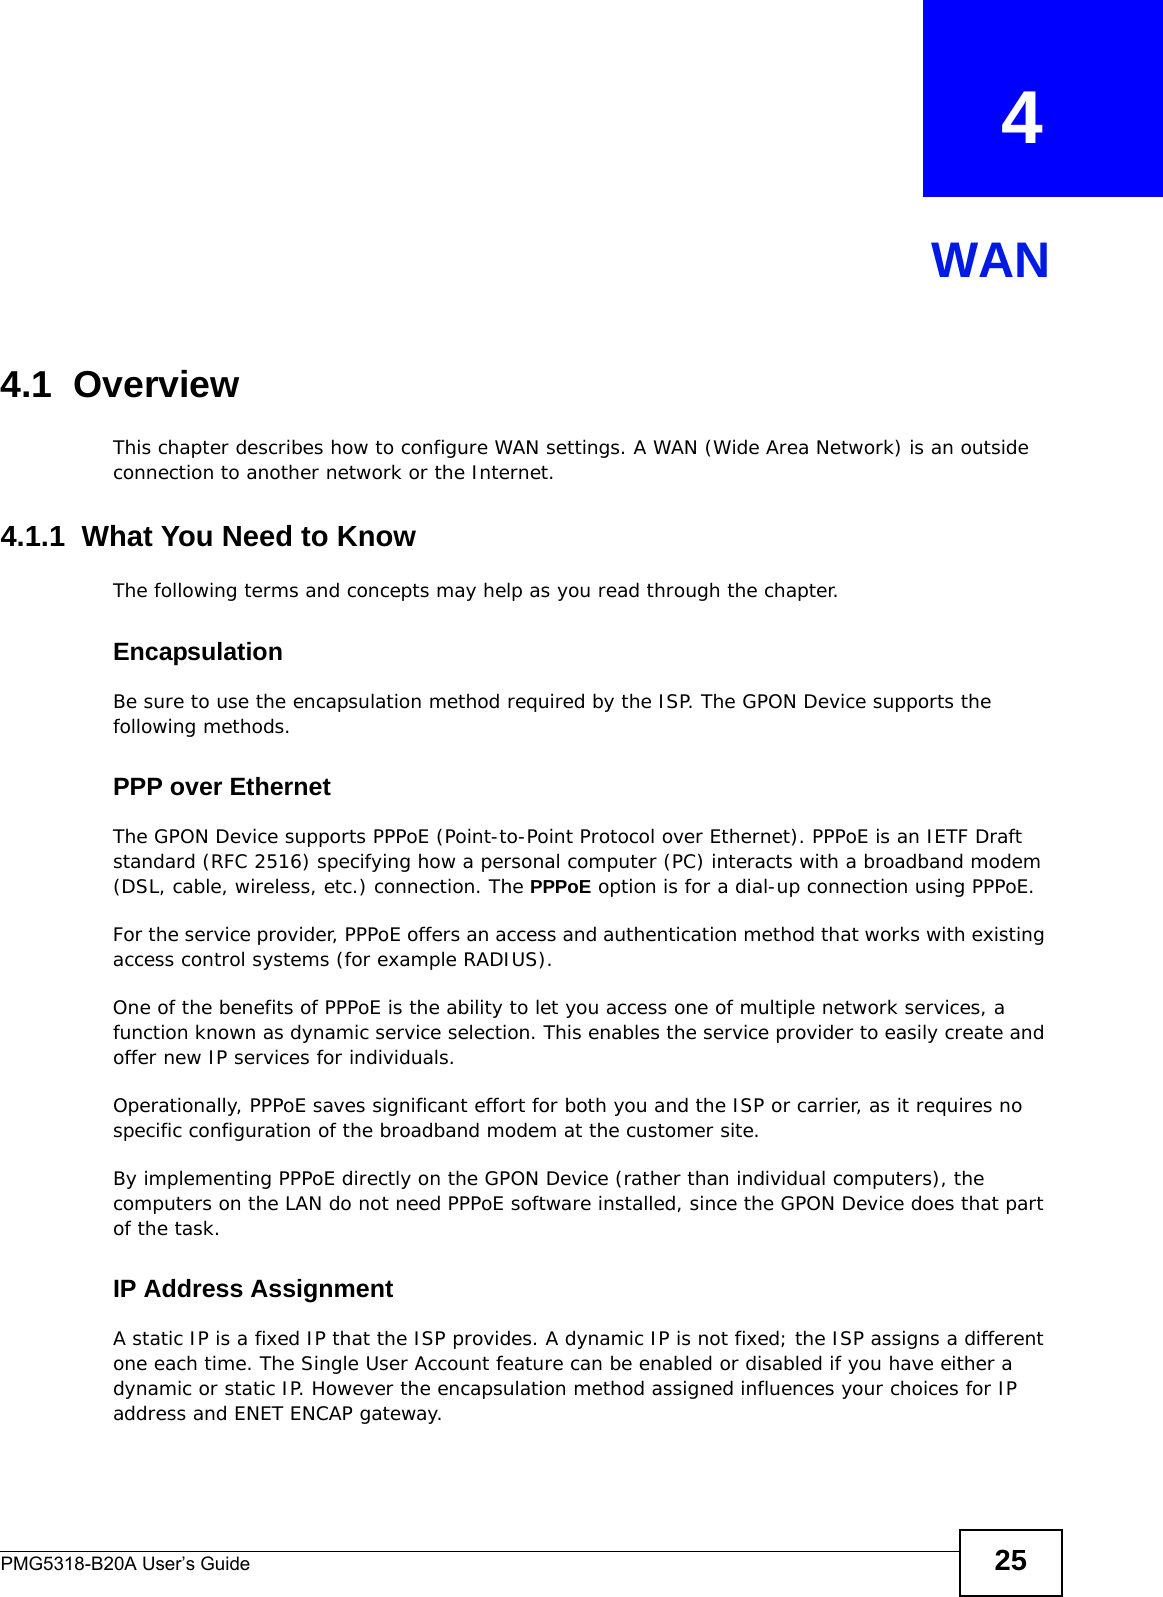 PMG5318-B20A User’s Guide 25CHAPTER   4WAN4.1  OverviewThis chapter describes how to configure WAN settings. A WAN (Wide Area Network) is an outside connection to another network or the Internet.4.1.1  What You Need to KnowThe following terms and concepts may help as you read through the chapter.EncapsulationBe sure to use the encapsulation method required by the ISP. The GPON Device supports the following methods.PPP over EthernetThe GPON Device supports PPPoE (Point-to-Point Protocol over Ethernet). PPPoE is an IETF Draft standard (RFC 2516) specifying how a personal computer (PC) interacts with a broadband modem (DSL, cable, wireless, etc.) connection. The PPPoE option is for a dial-up connection using PPPoE.For the service provider, PPPoE offers an access and authentication method that works with existing access control systems (for example RADIUS).One of the benefits of PPPoE is the ability to let you access one of multiple network services, a function known as dynamic service selection. This enables the service provider to easily create and offer new IP services for individuals.Operationally, PPPoE saves significant effort for both you and the ISP or carrier, as it requires no specific configuration of the broadband modem at the customer site.By implementing PPPoE directly on the GPON Device (rather than individual computers), the computers on the LAN do not need PPPoE software installed, since the GPON Device does that part of the task.IP Address AssignmentA static IP is a fixed IP that the ISP provides. A dynamic IP is not fixed; the ISP assigns a different one each time. The Single User Account feature can be enabled or disabled if you have either a dynamic or static IP. However the encapsulation method assigned influences your choices for IP address and ENET ENCAP gateway.